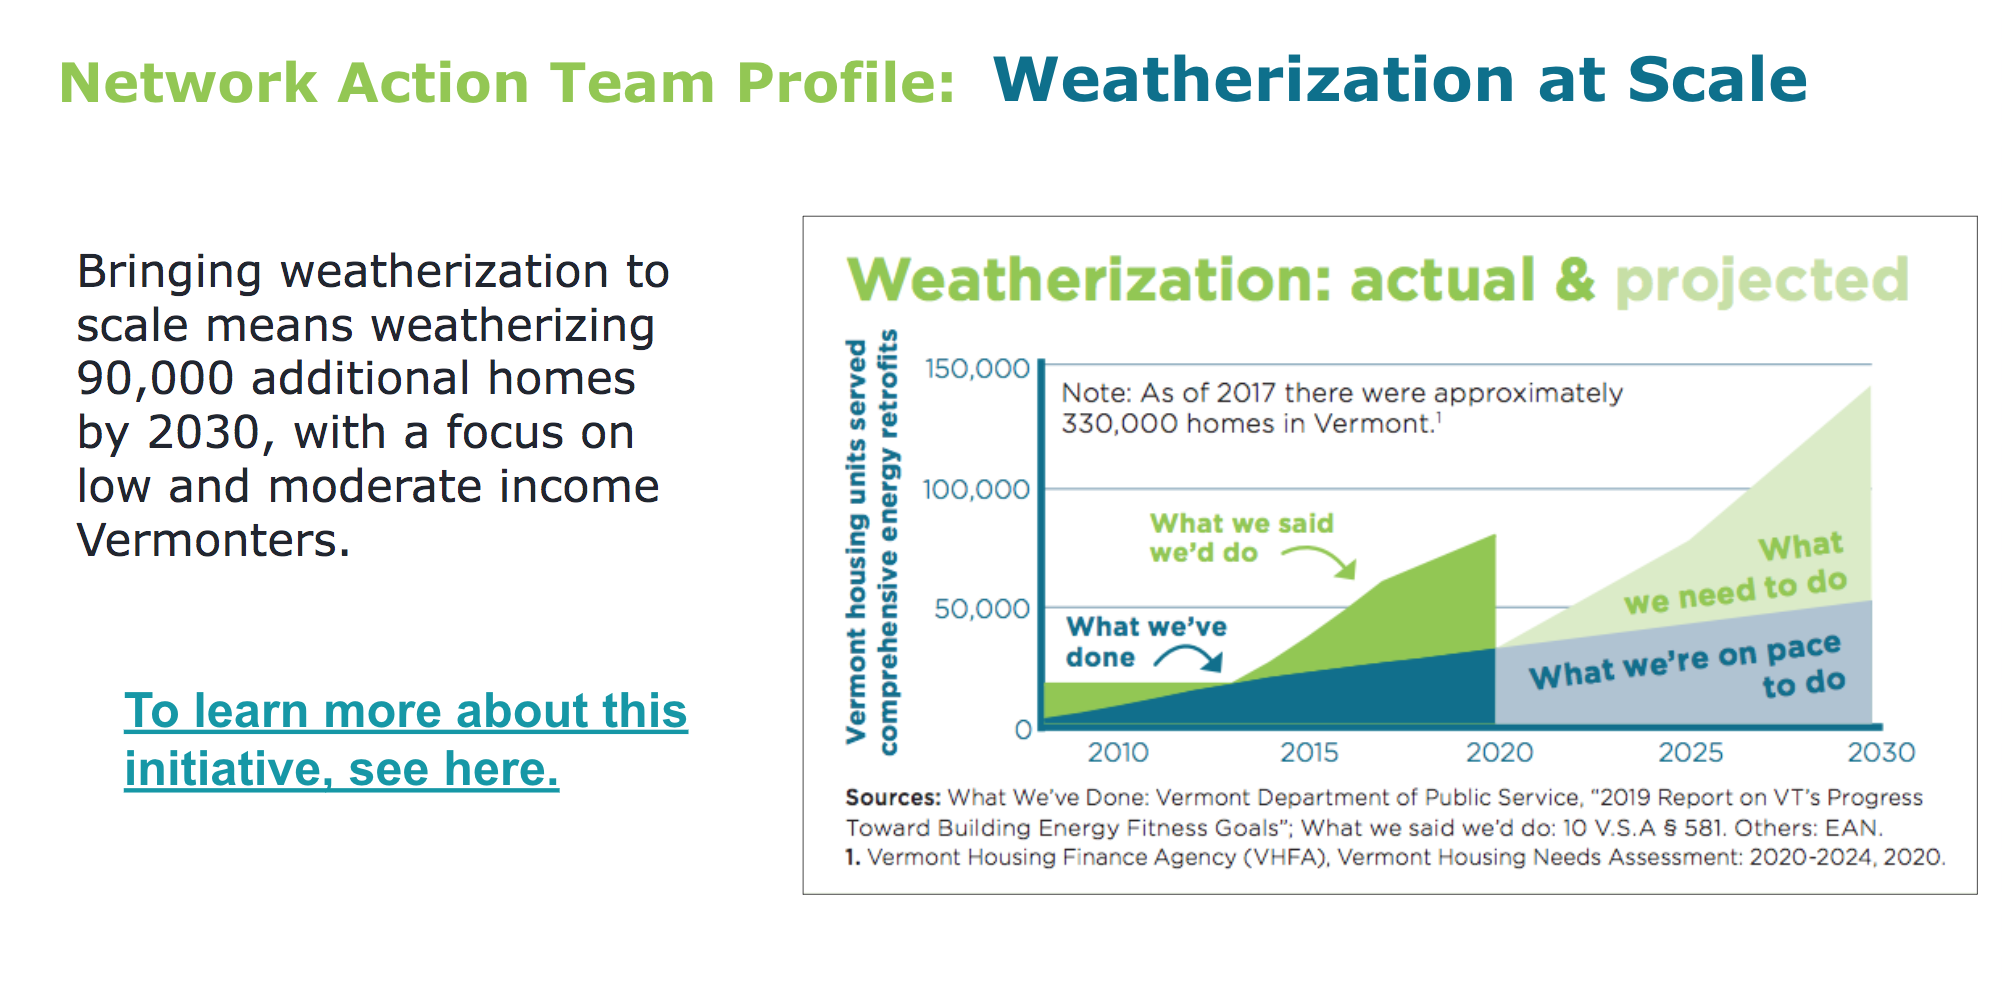 Network Action Team Profile: Weatherization at Scale